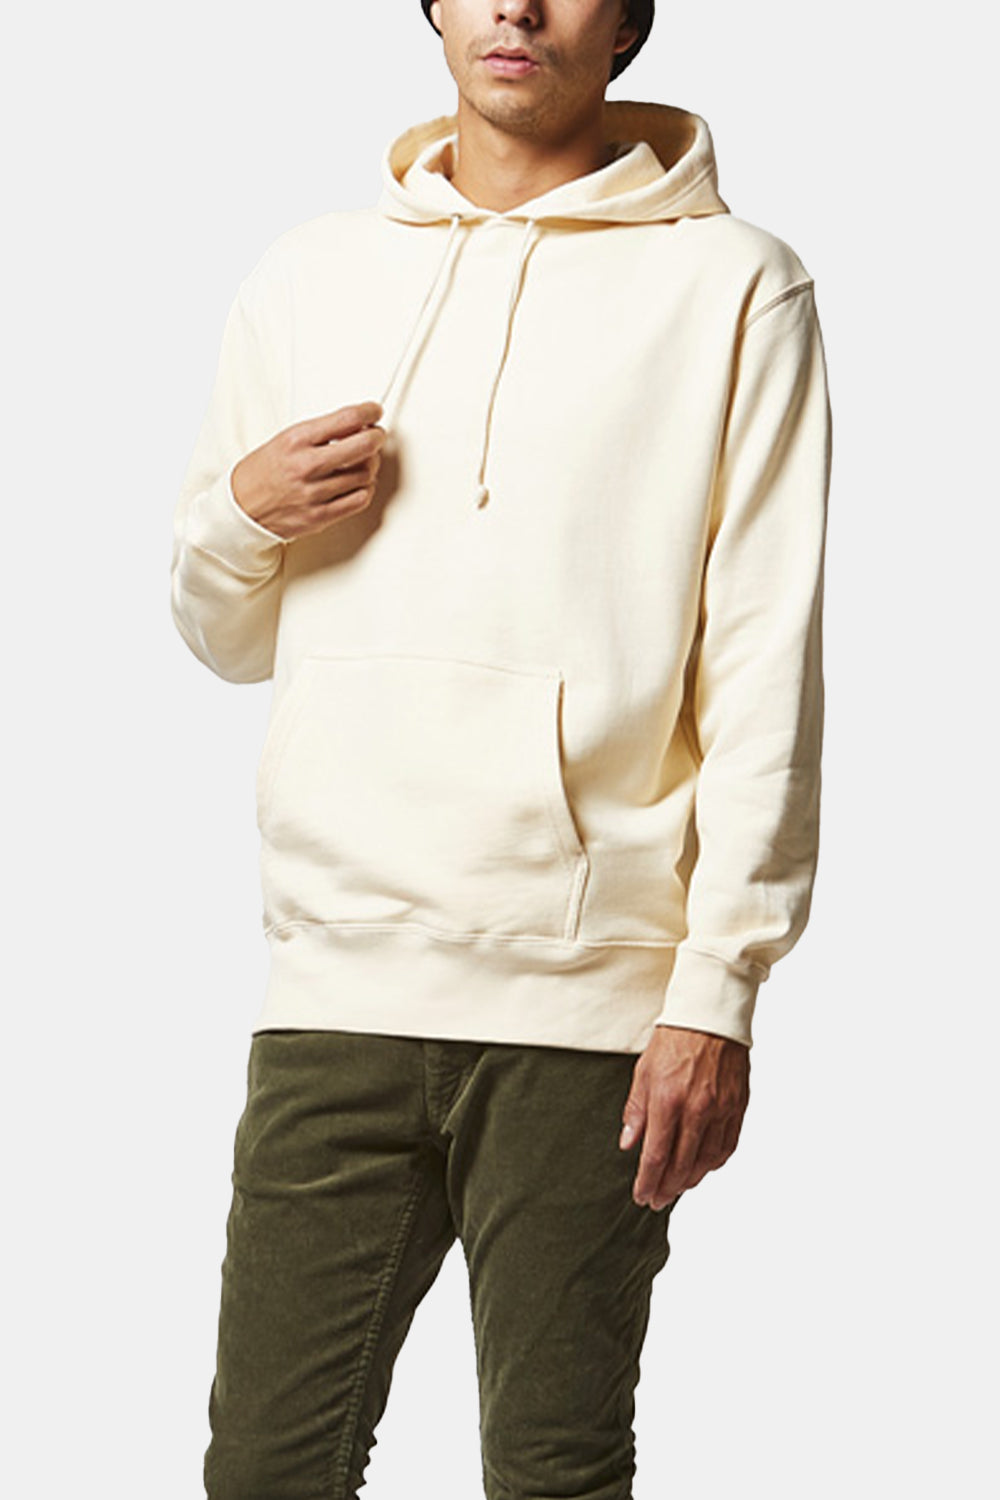 United Athle 5214 10.0oz Sweat Pullover Hoodie (Natural)
